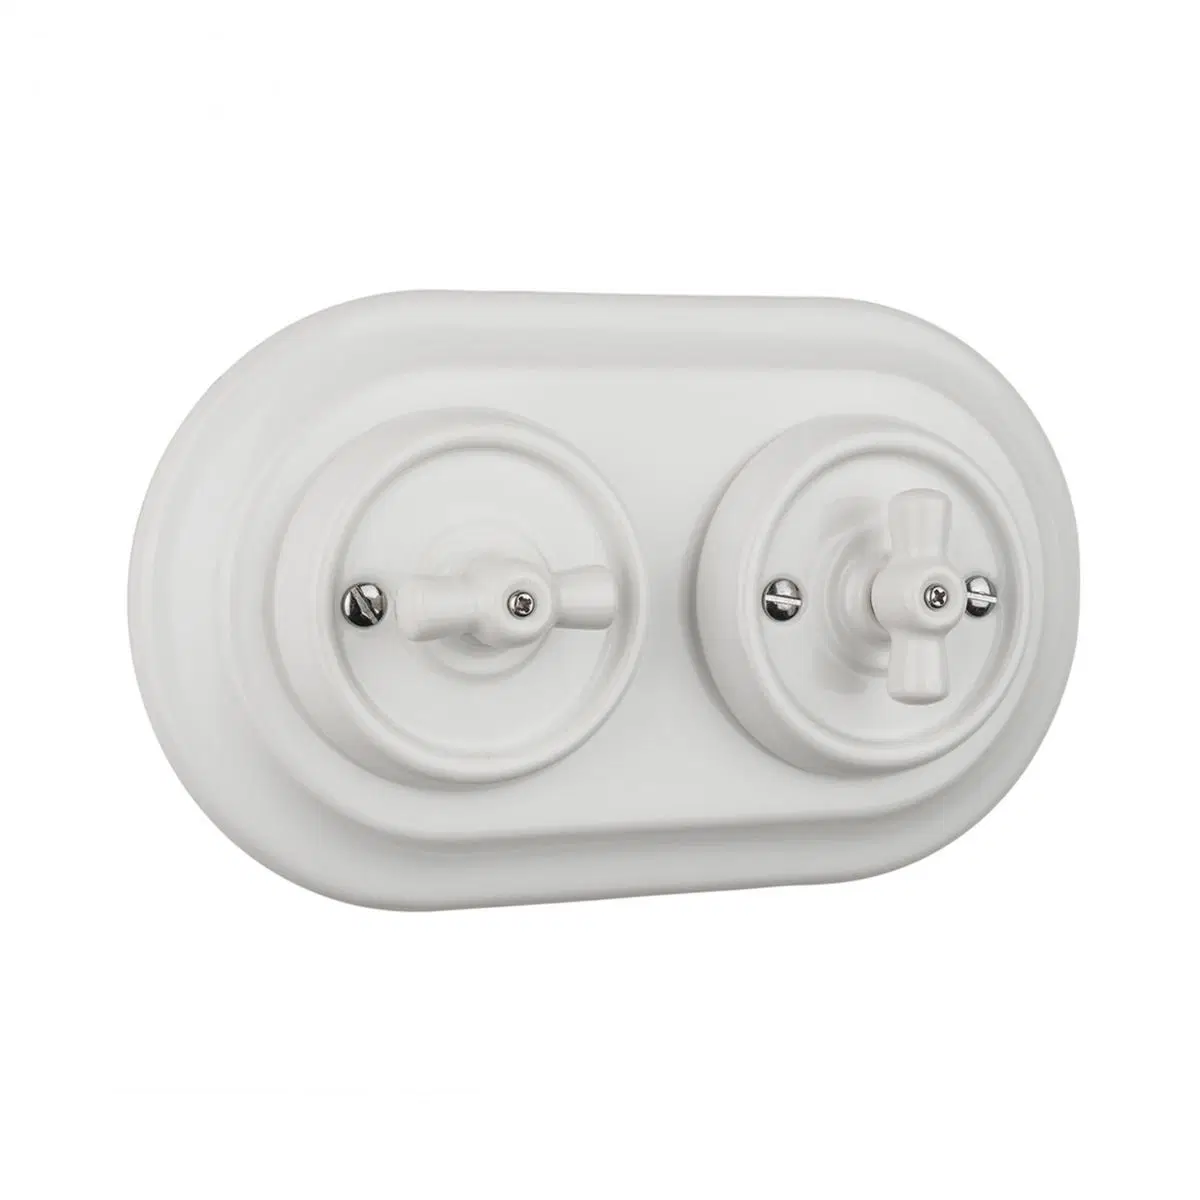 White Porcelain Rotating Switch Ceramic Wall Switch with 2 Holes Porcelain Frame